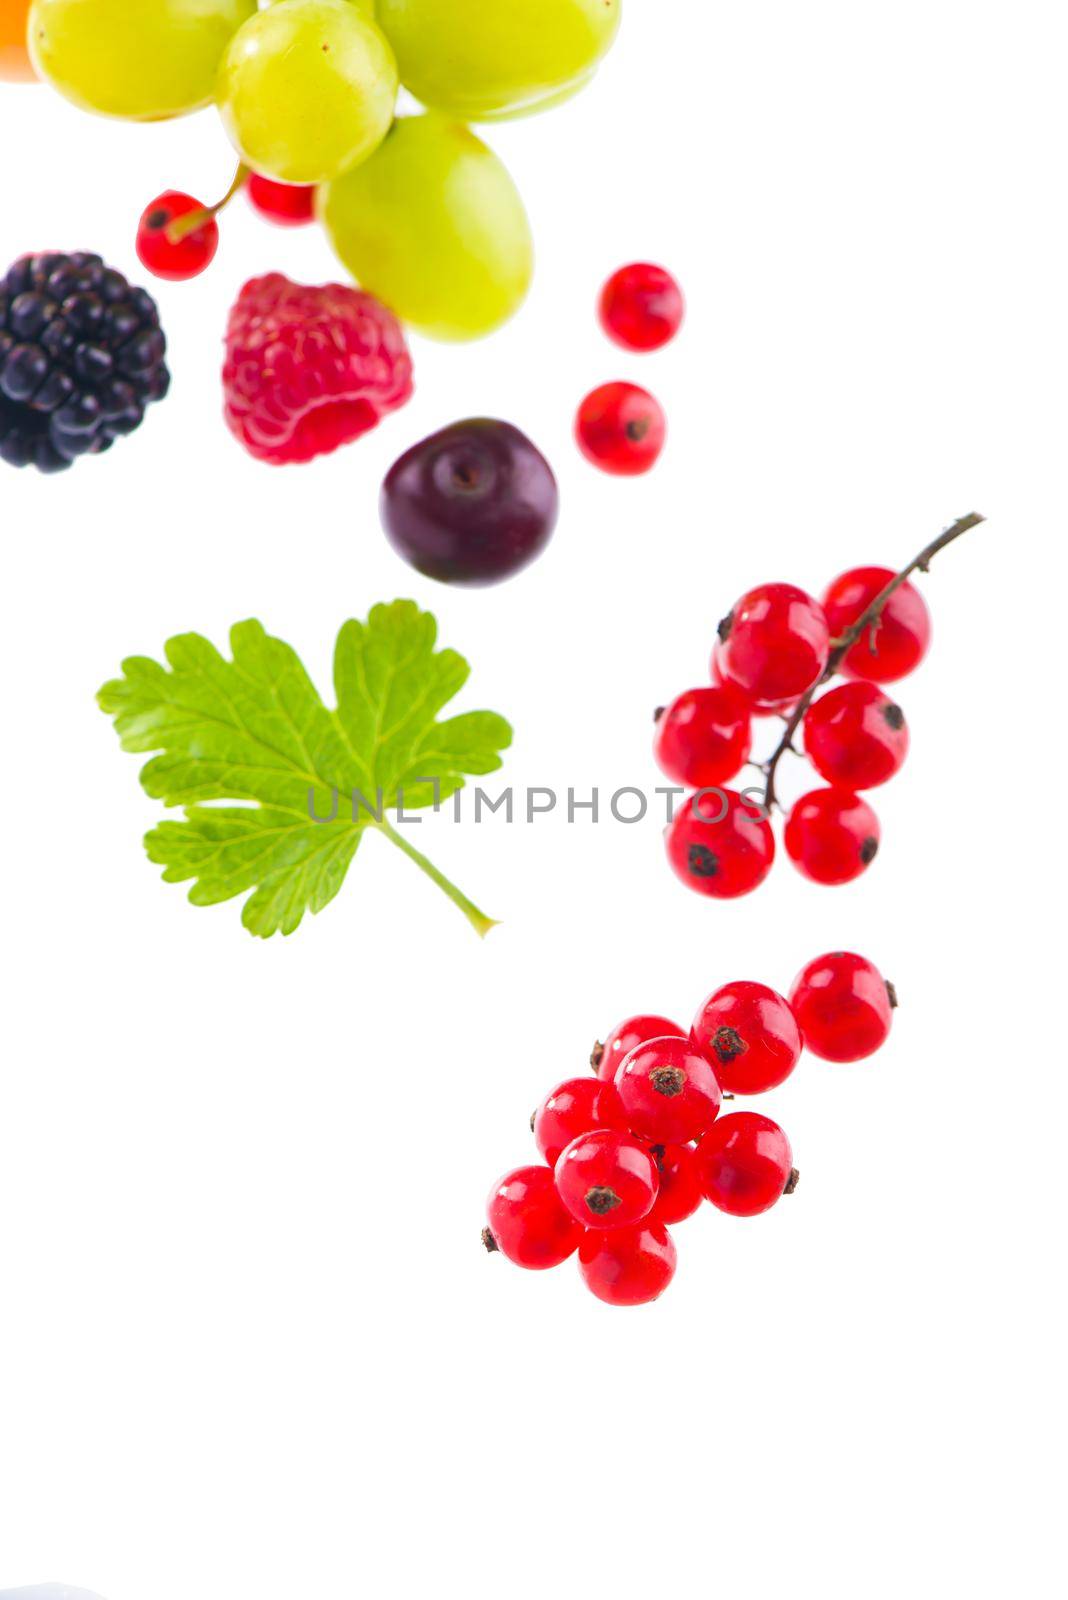 berry mix isolated on a white background.